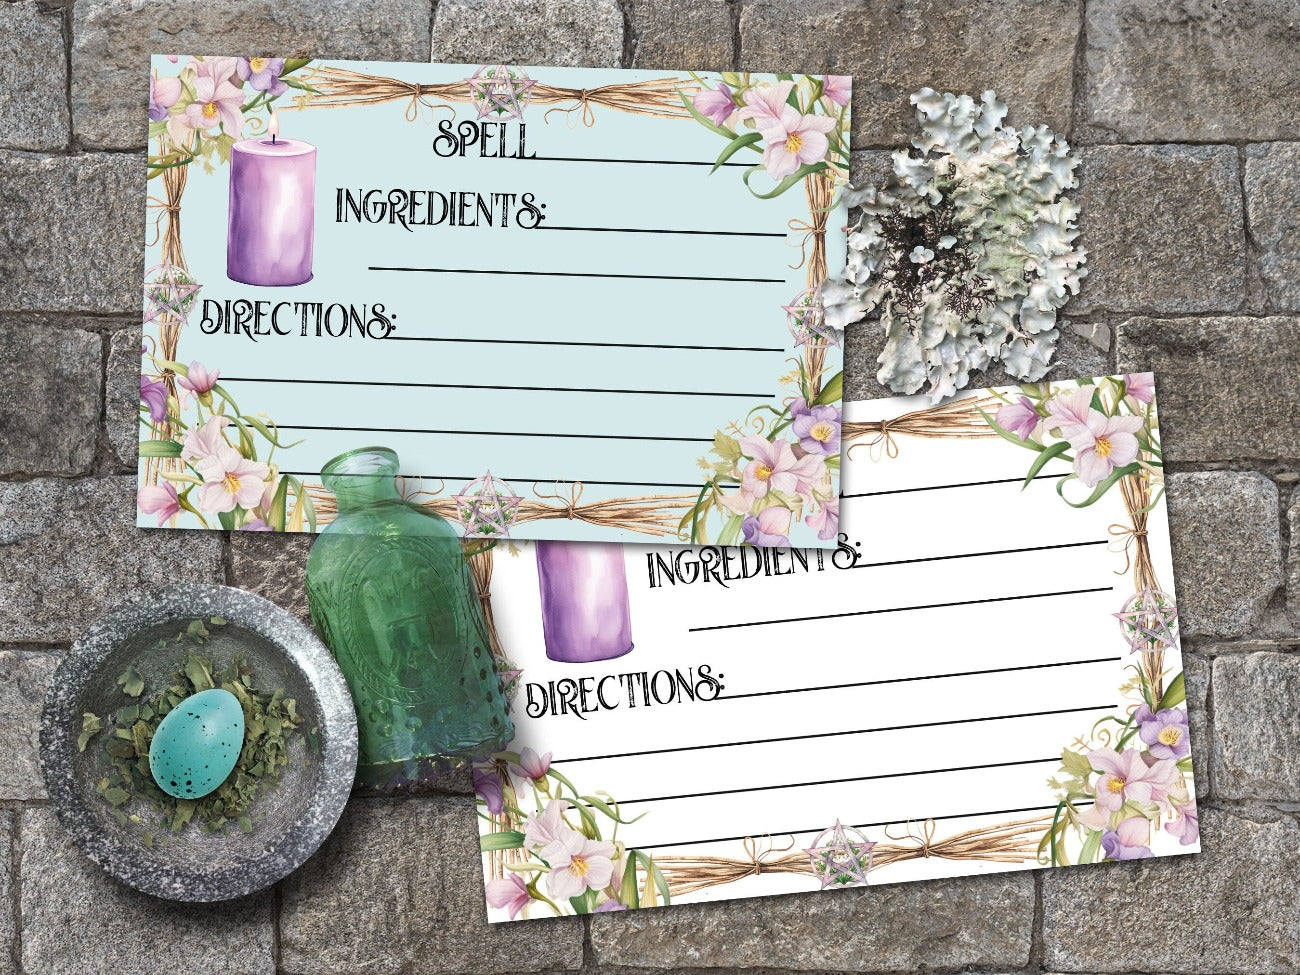 IMBOLC SPELL CARDS, Closeup of two cards, one with a pale blue background and one with a white background. Rectangular cards have whimsical font that read Spell, Ingredients, Directions - Morgana Magick Spell